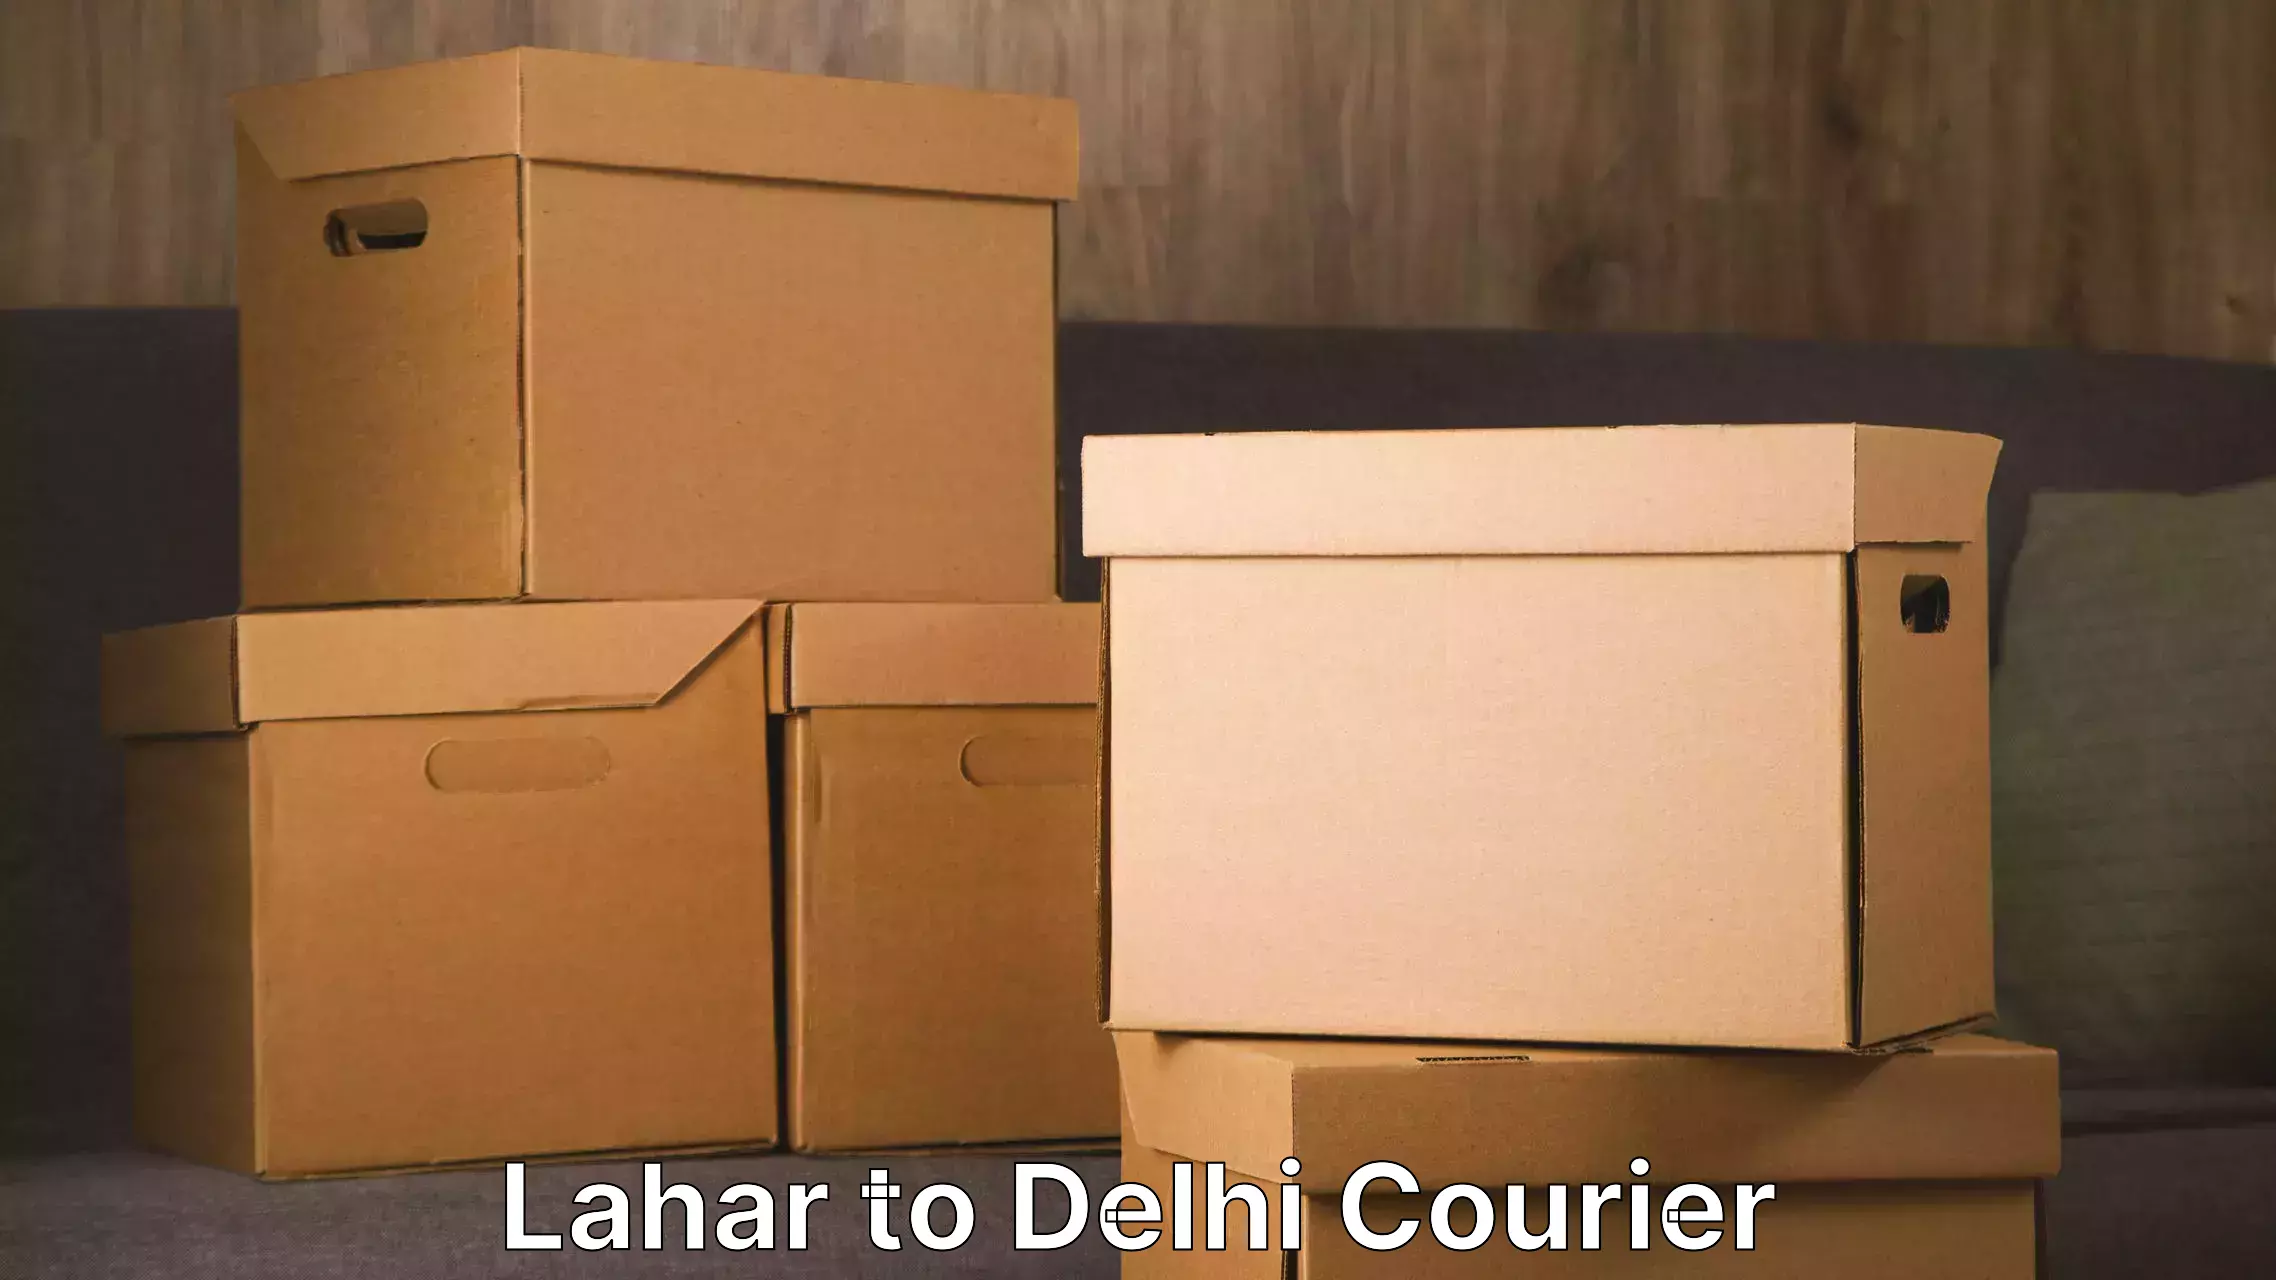 Household transport services Lahar to Lodhi Road